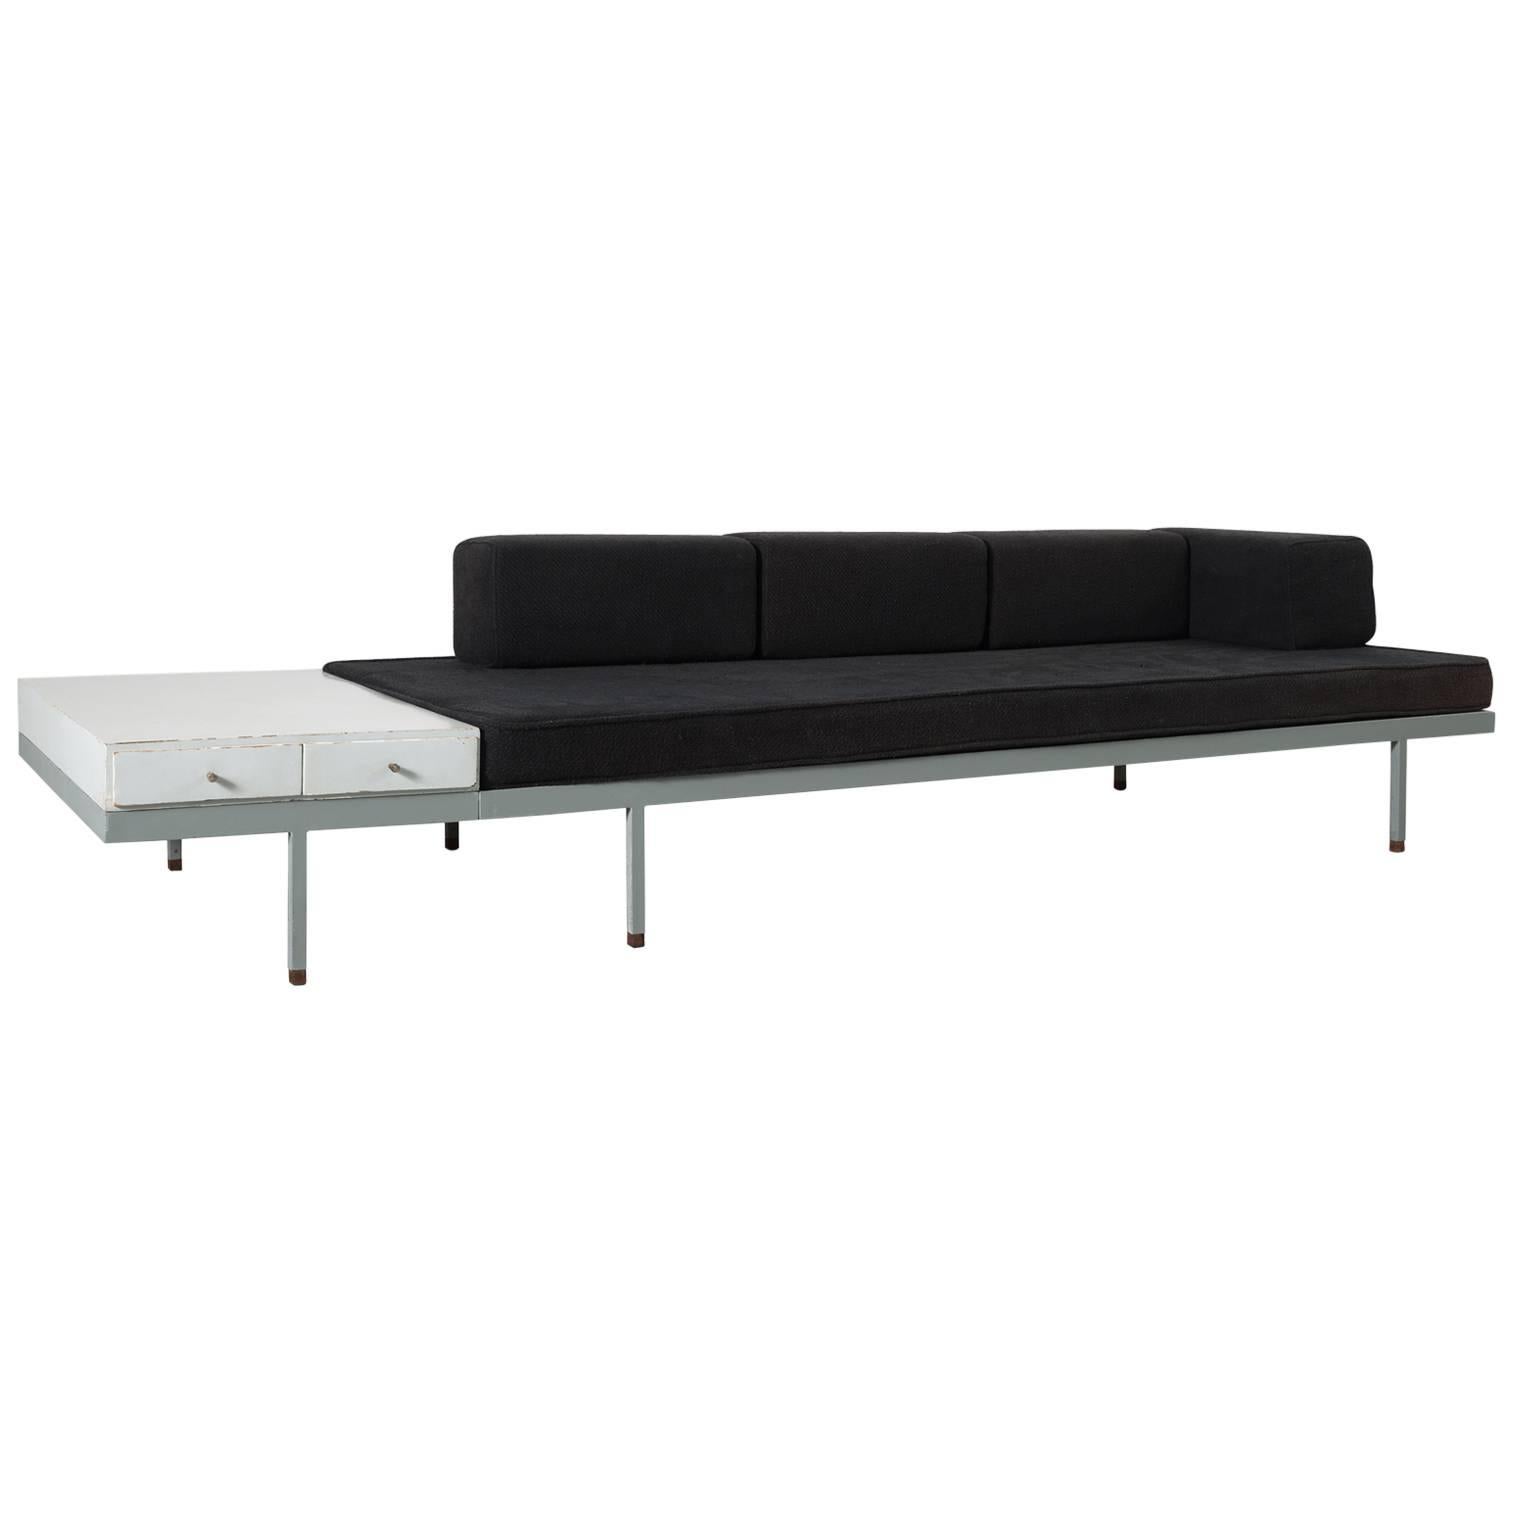 Midcentury Metal Sofa in Black Fabric Upholstery and Integrated Side Table 